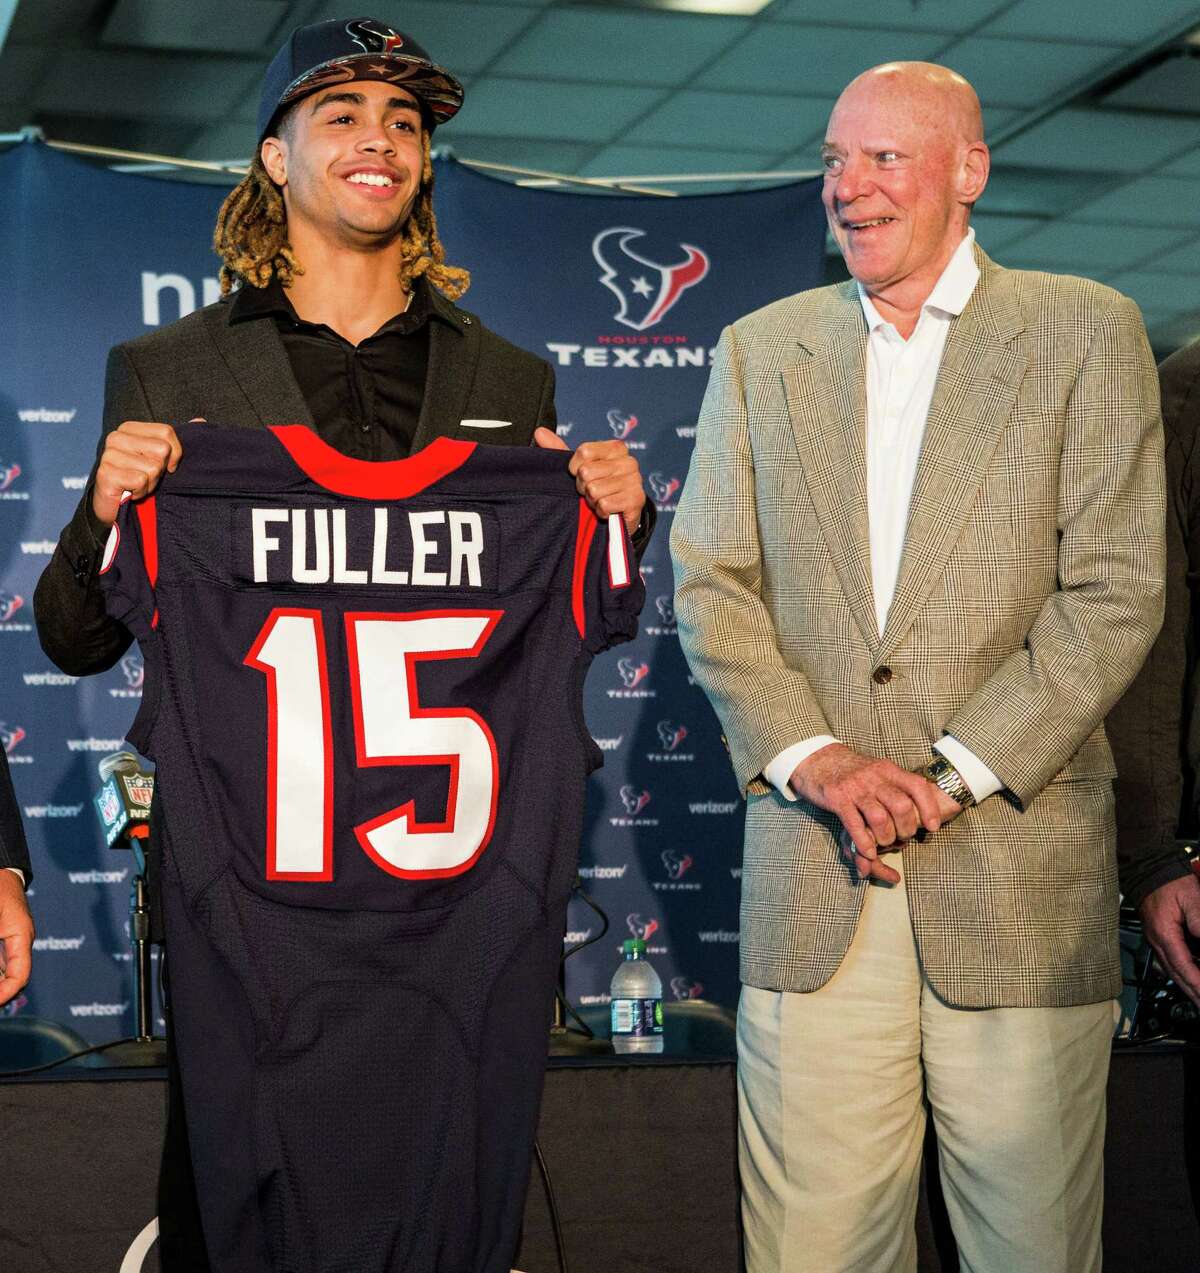 Houston Texans top draft pick, Notre Dame wide receiver Will Fuller, left, stands with owner Bob McNair as he shows off his new Texans jersey during a news conference at NRG Stadium on Friday, April 29, 2016, in Houston.